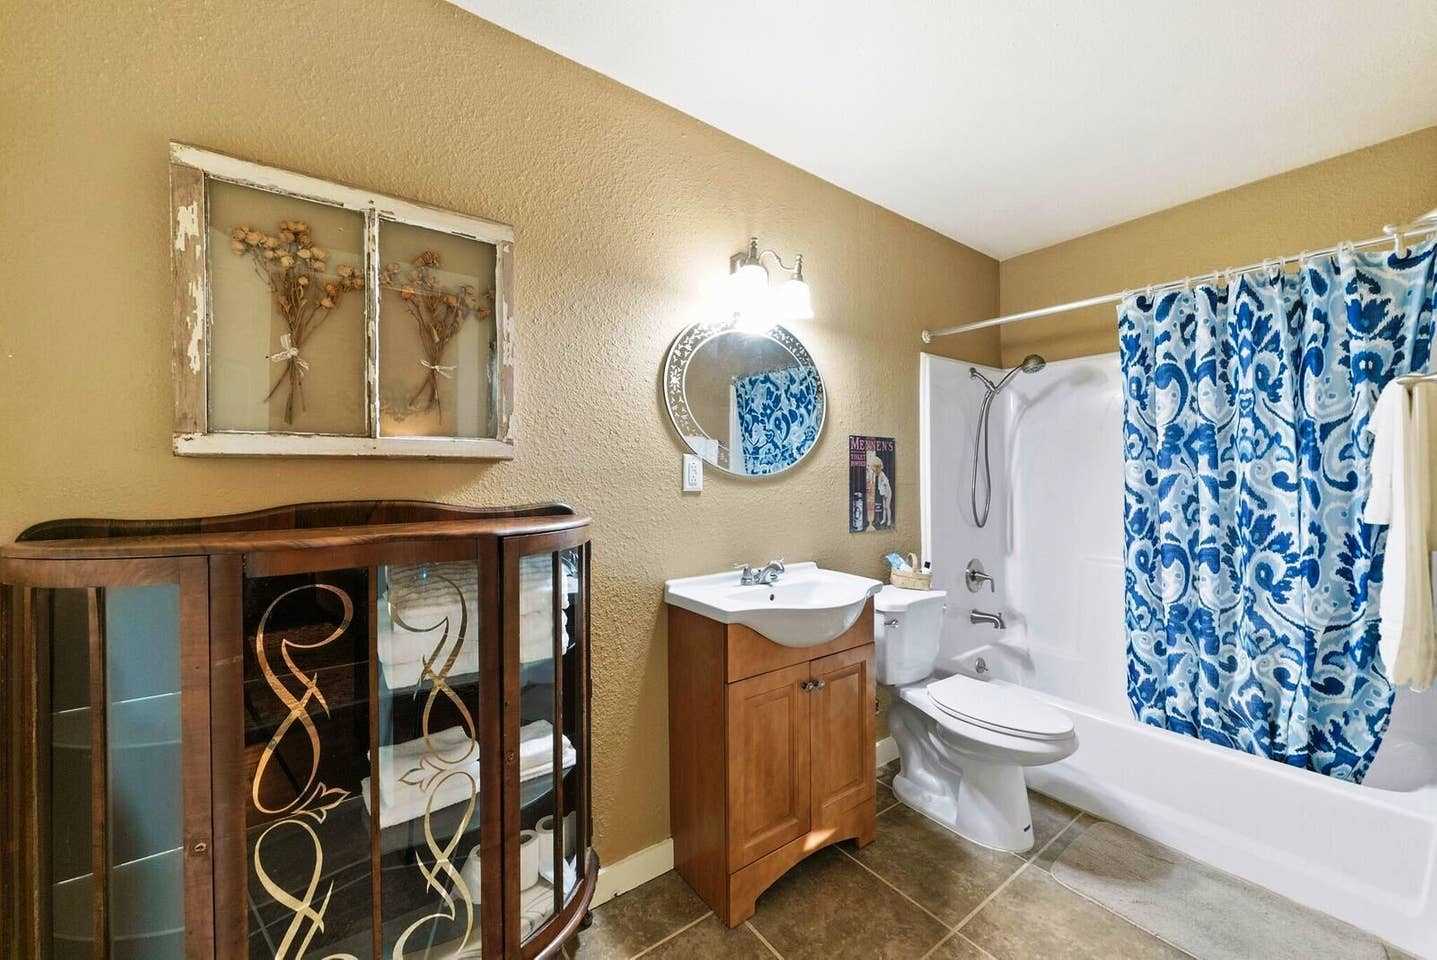                                                 Cleanup won't be an issue, with three full baths for up to 12 guests.